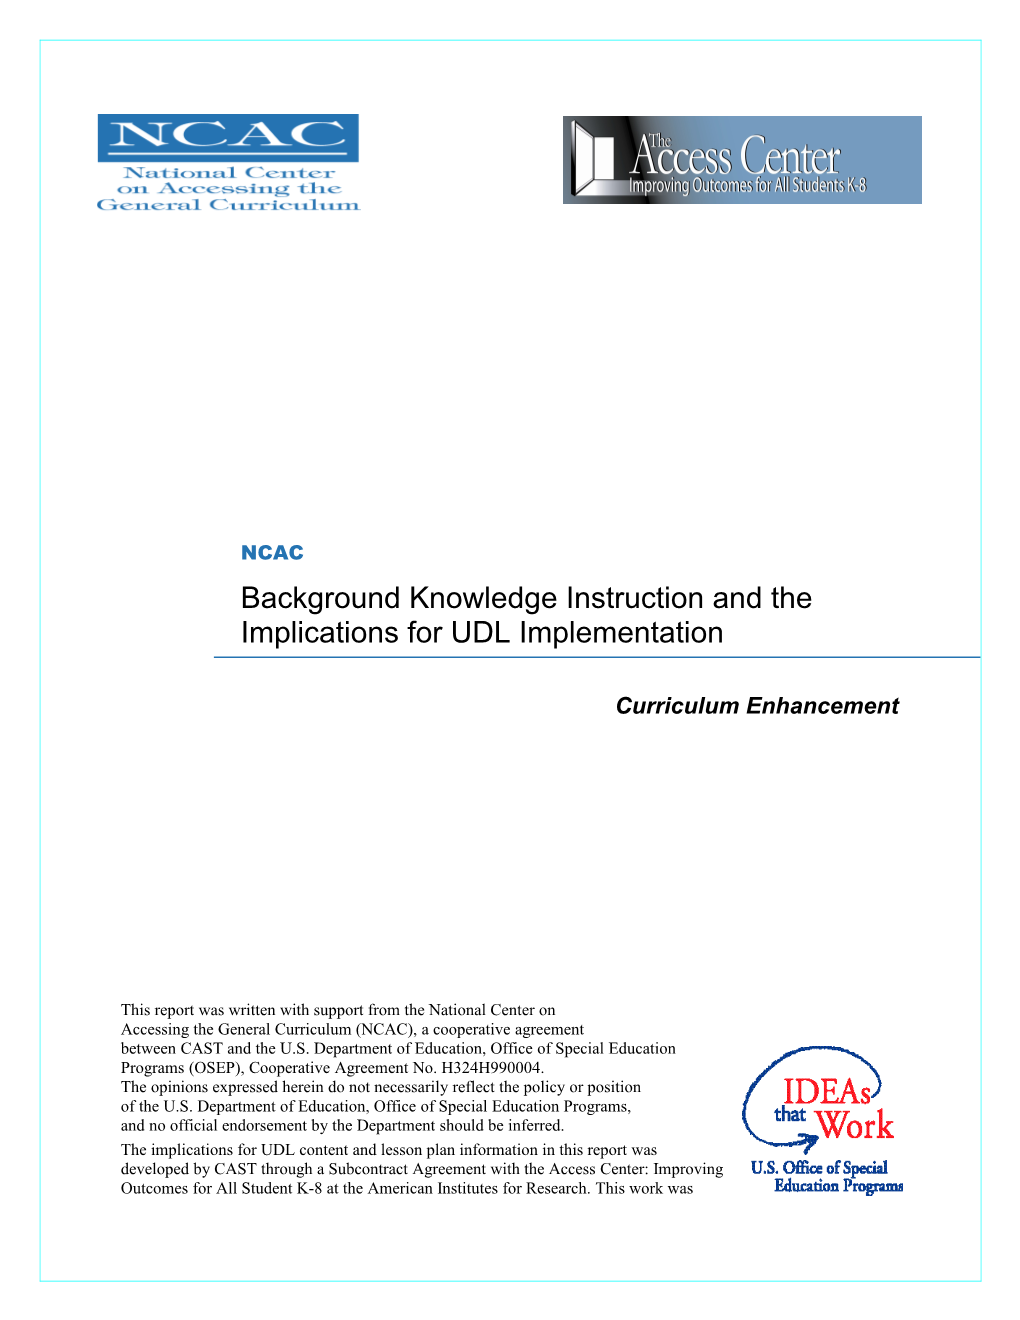 Background Knowledge Instruction and the Implications for UDL Implementation